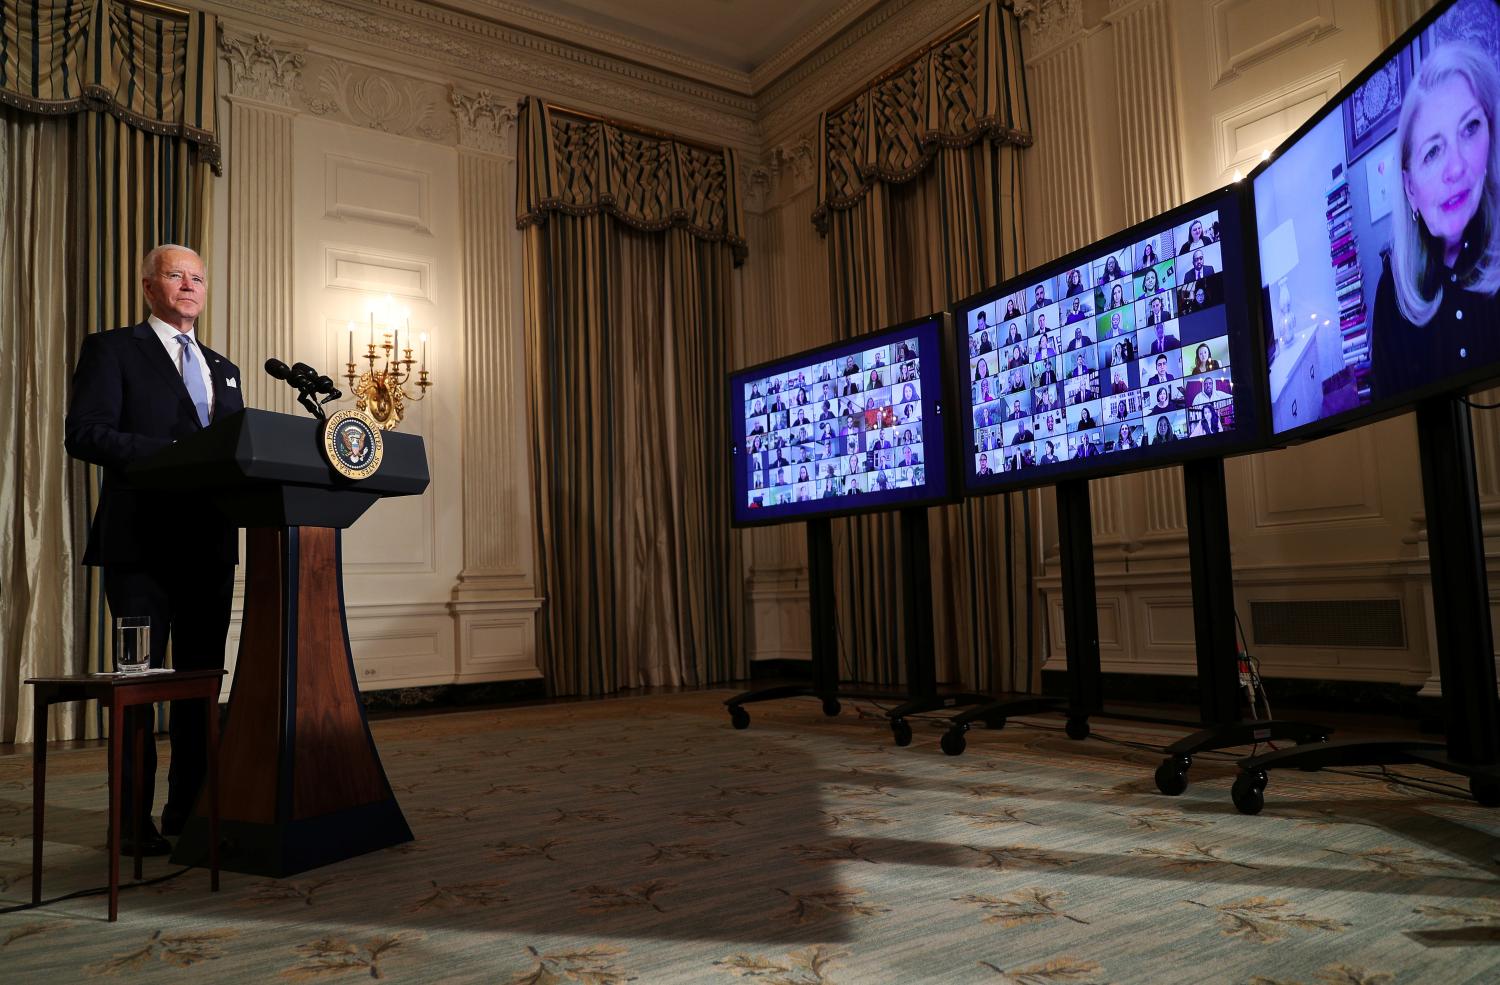 U.S. President Joe Biden swears in presidential appointees in a virtual ceremony in the State Dining Room of the White House in Washington, after his inauguration as the 46th President of the United States, U.S., January 20, 2021. REUTERS/Tom Brenner